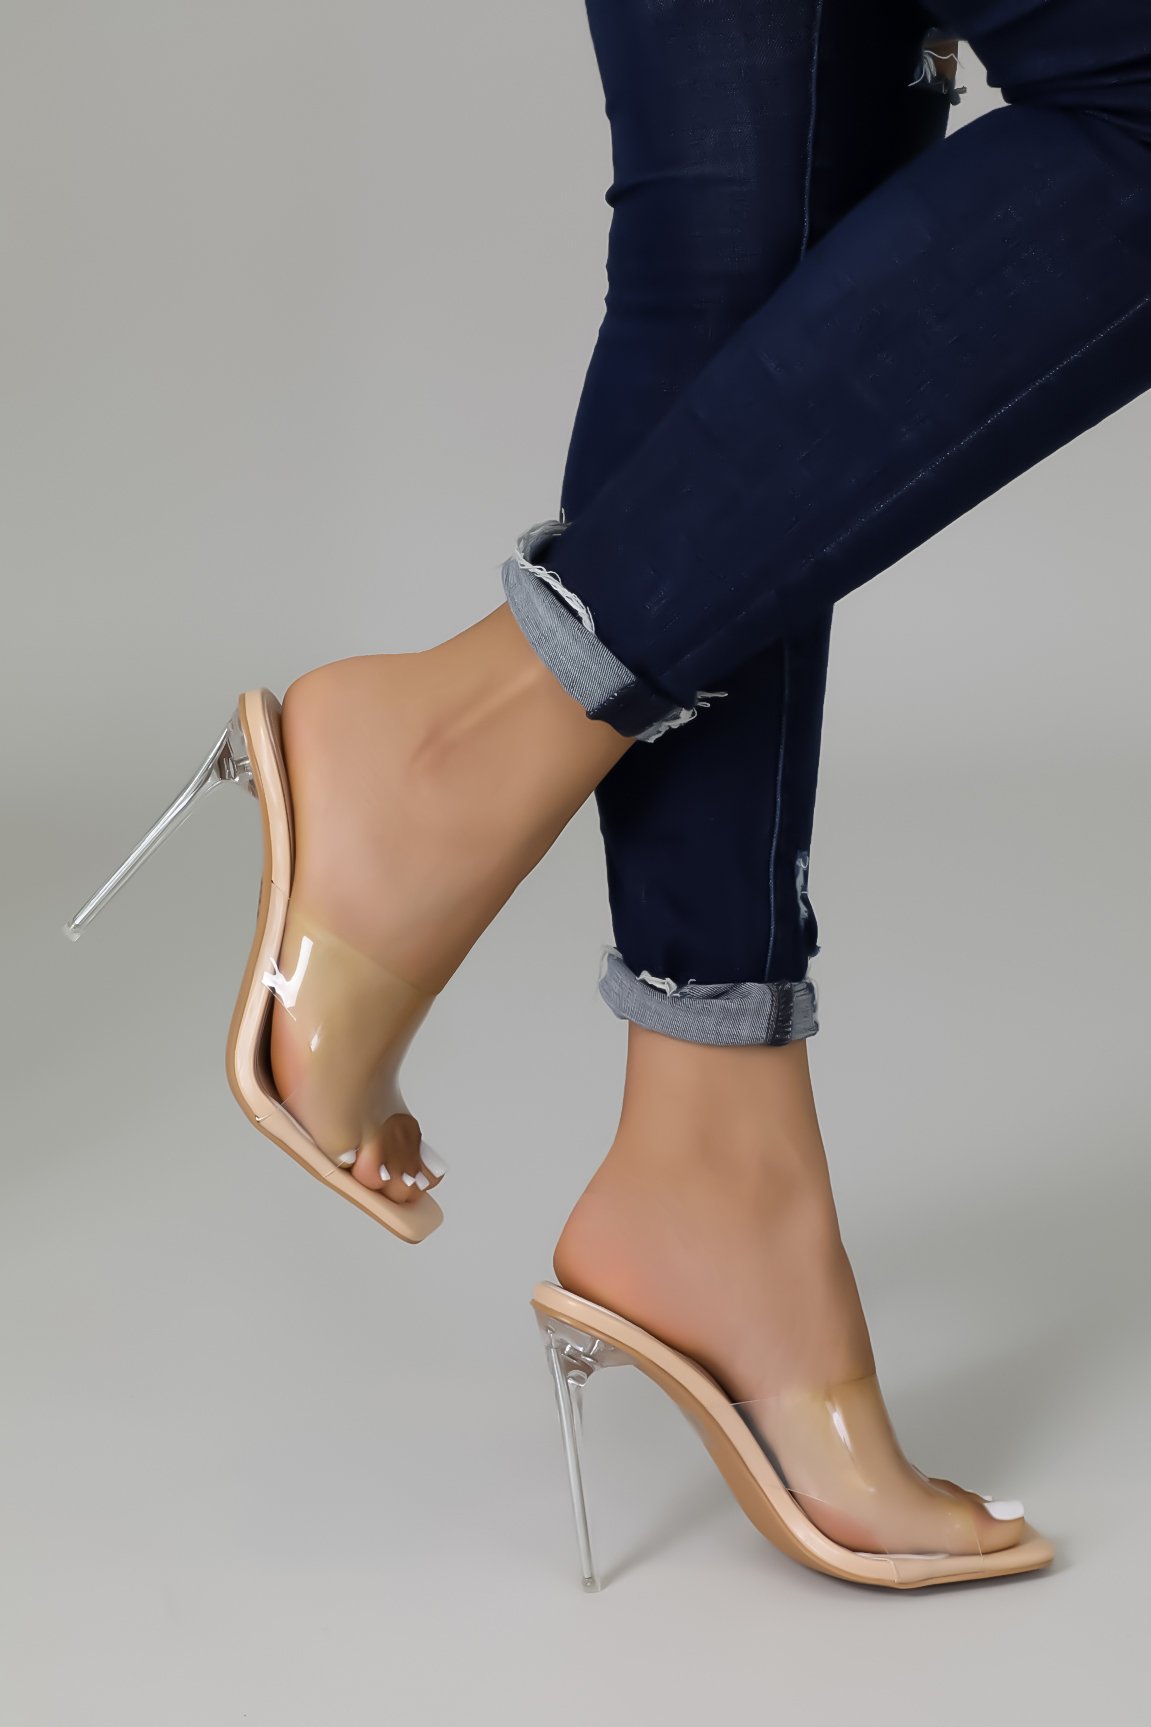 Clear Intentions Heels